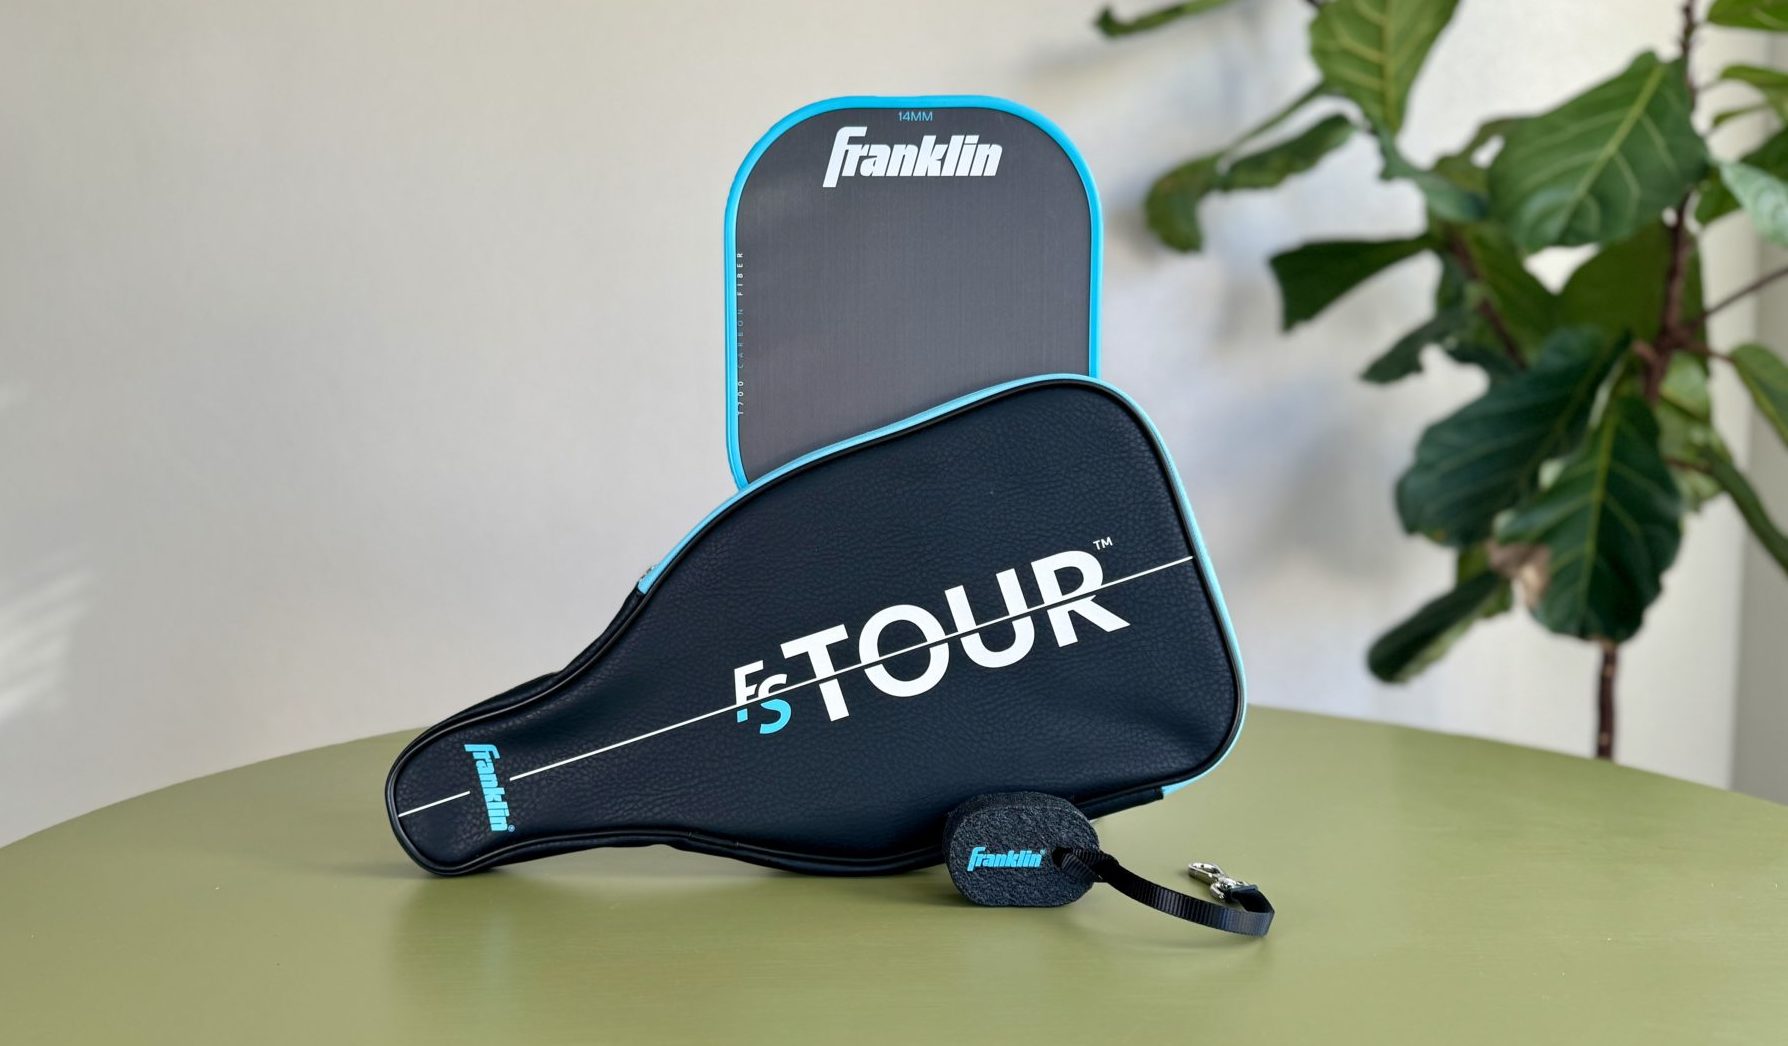 Franklin_FS_Tour_Package_Items